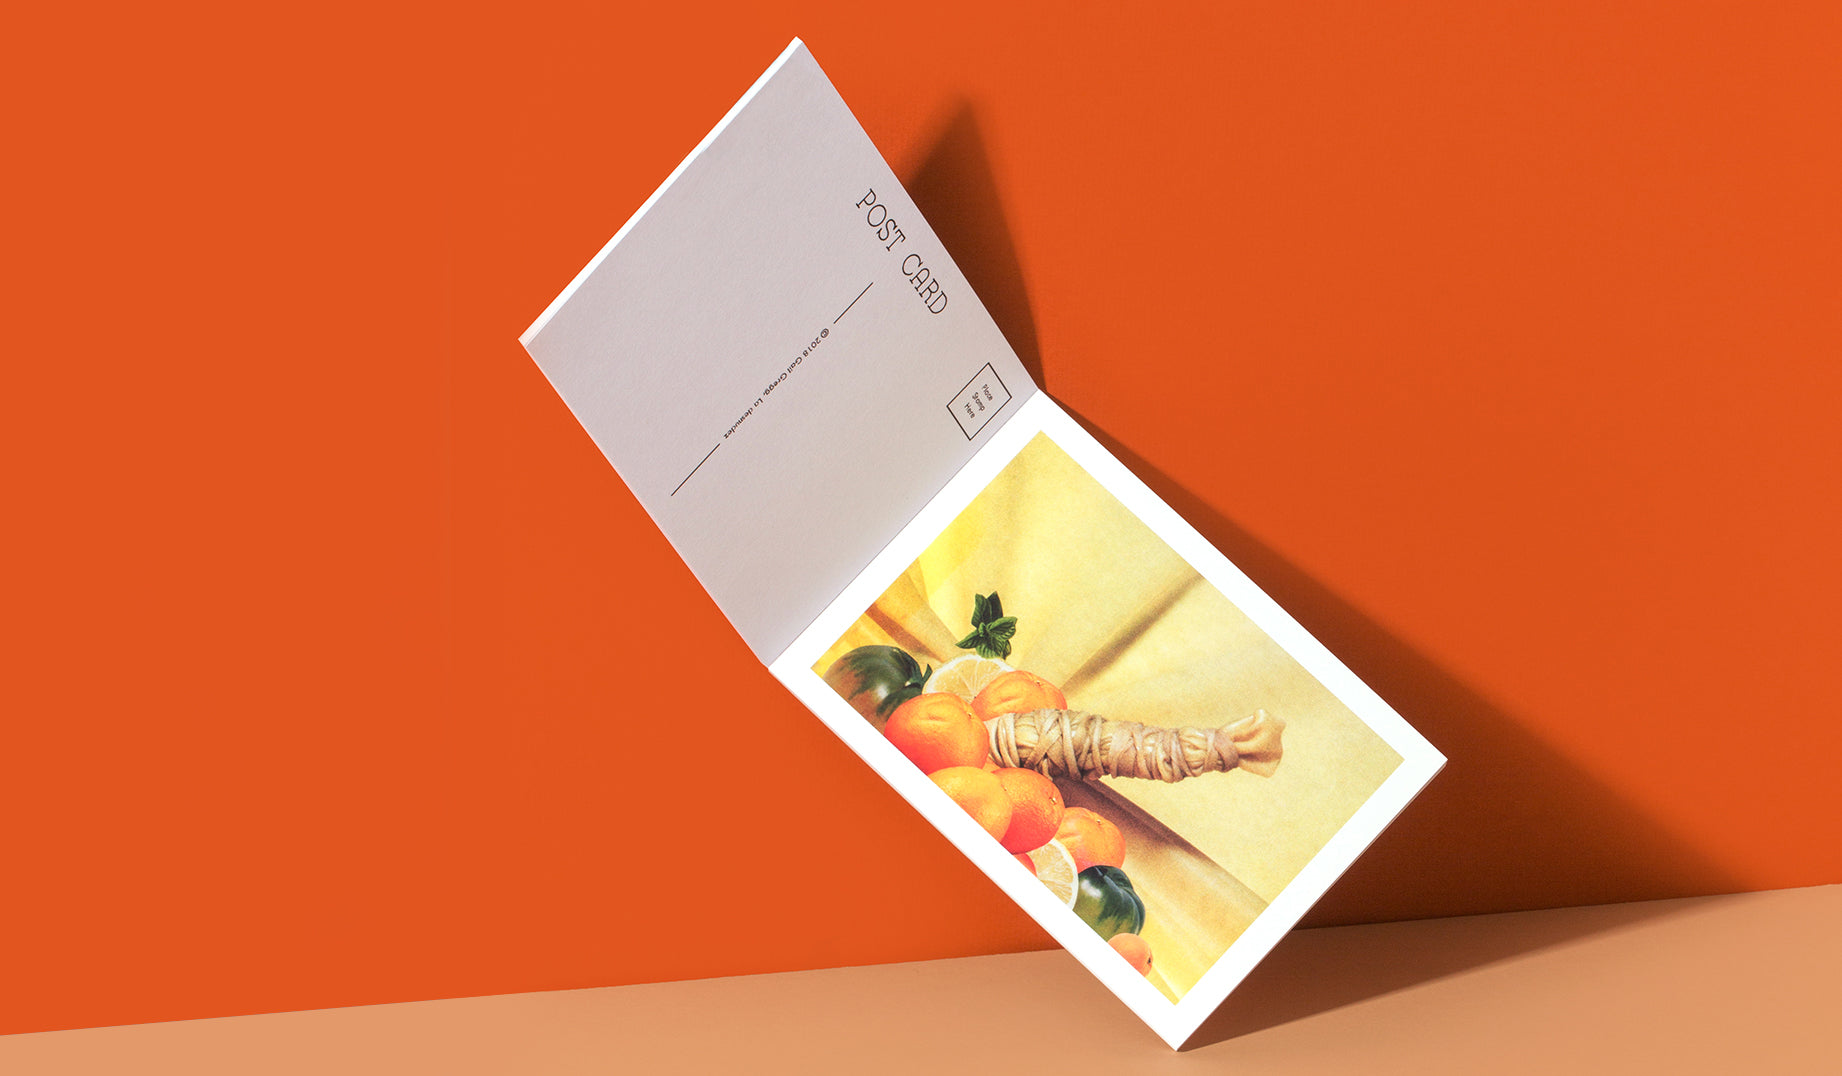 Impress your clients with a postcard notepad as a promo. Include a wide range of your images in a format they can use for their own personal correspondence.